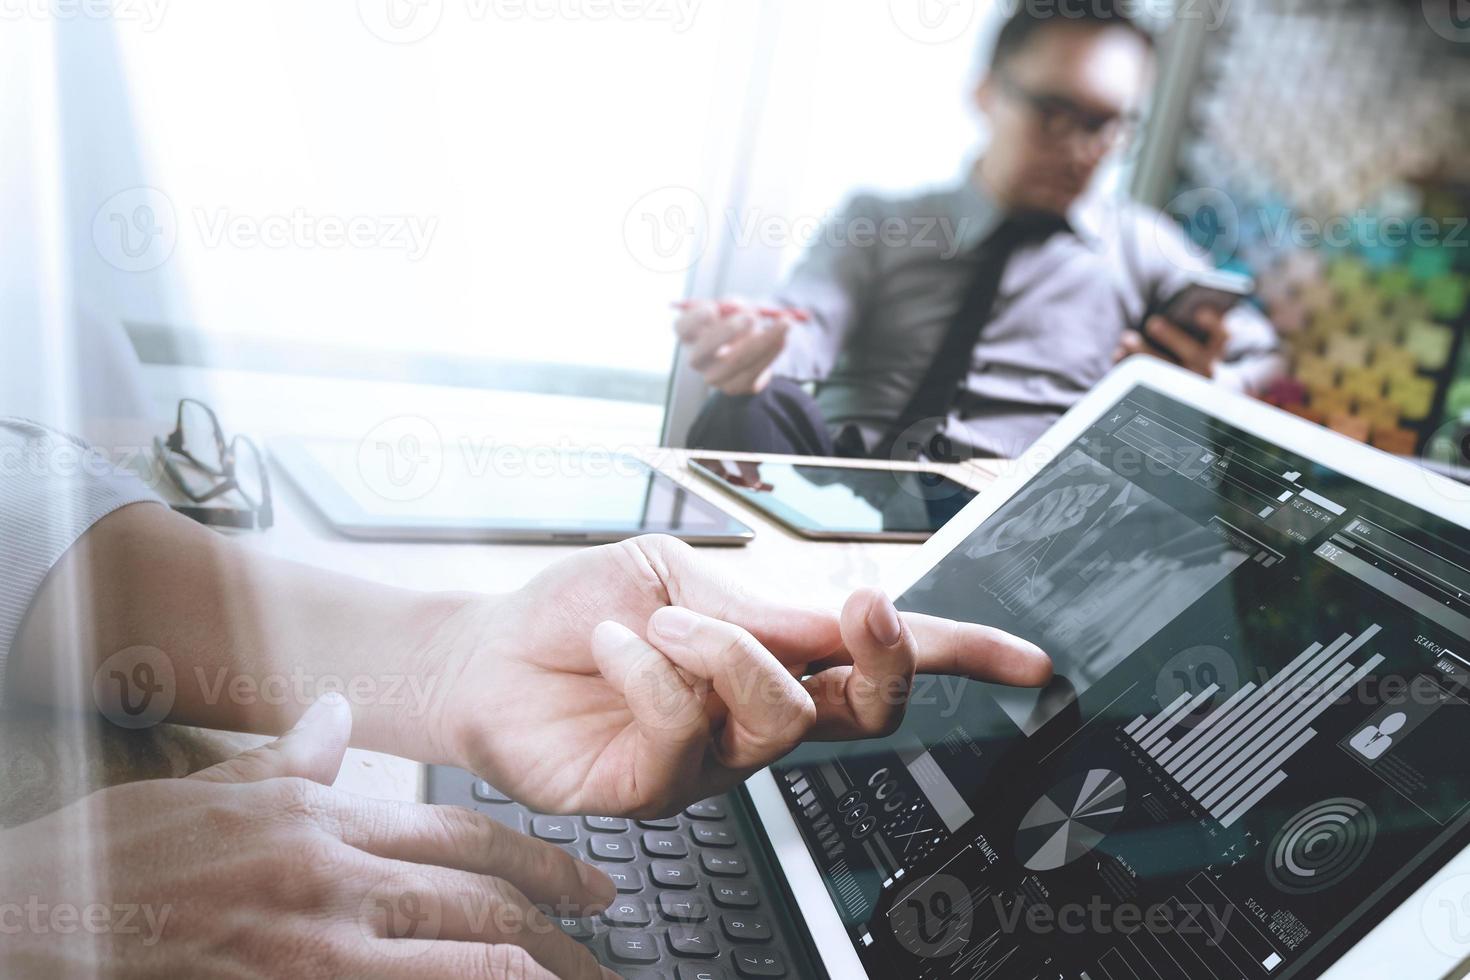 Business team meeting present. Photo professional investor working with new start up project. Digital tablet laptop computer design smart phone using, keyboard docking screen foreground,sun flare